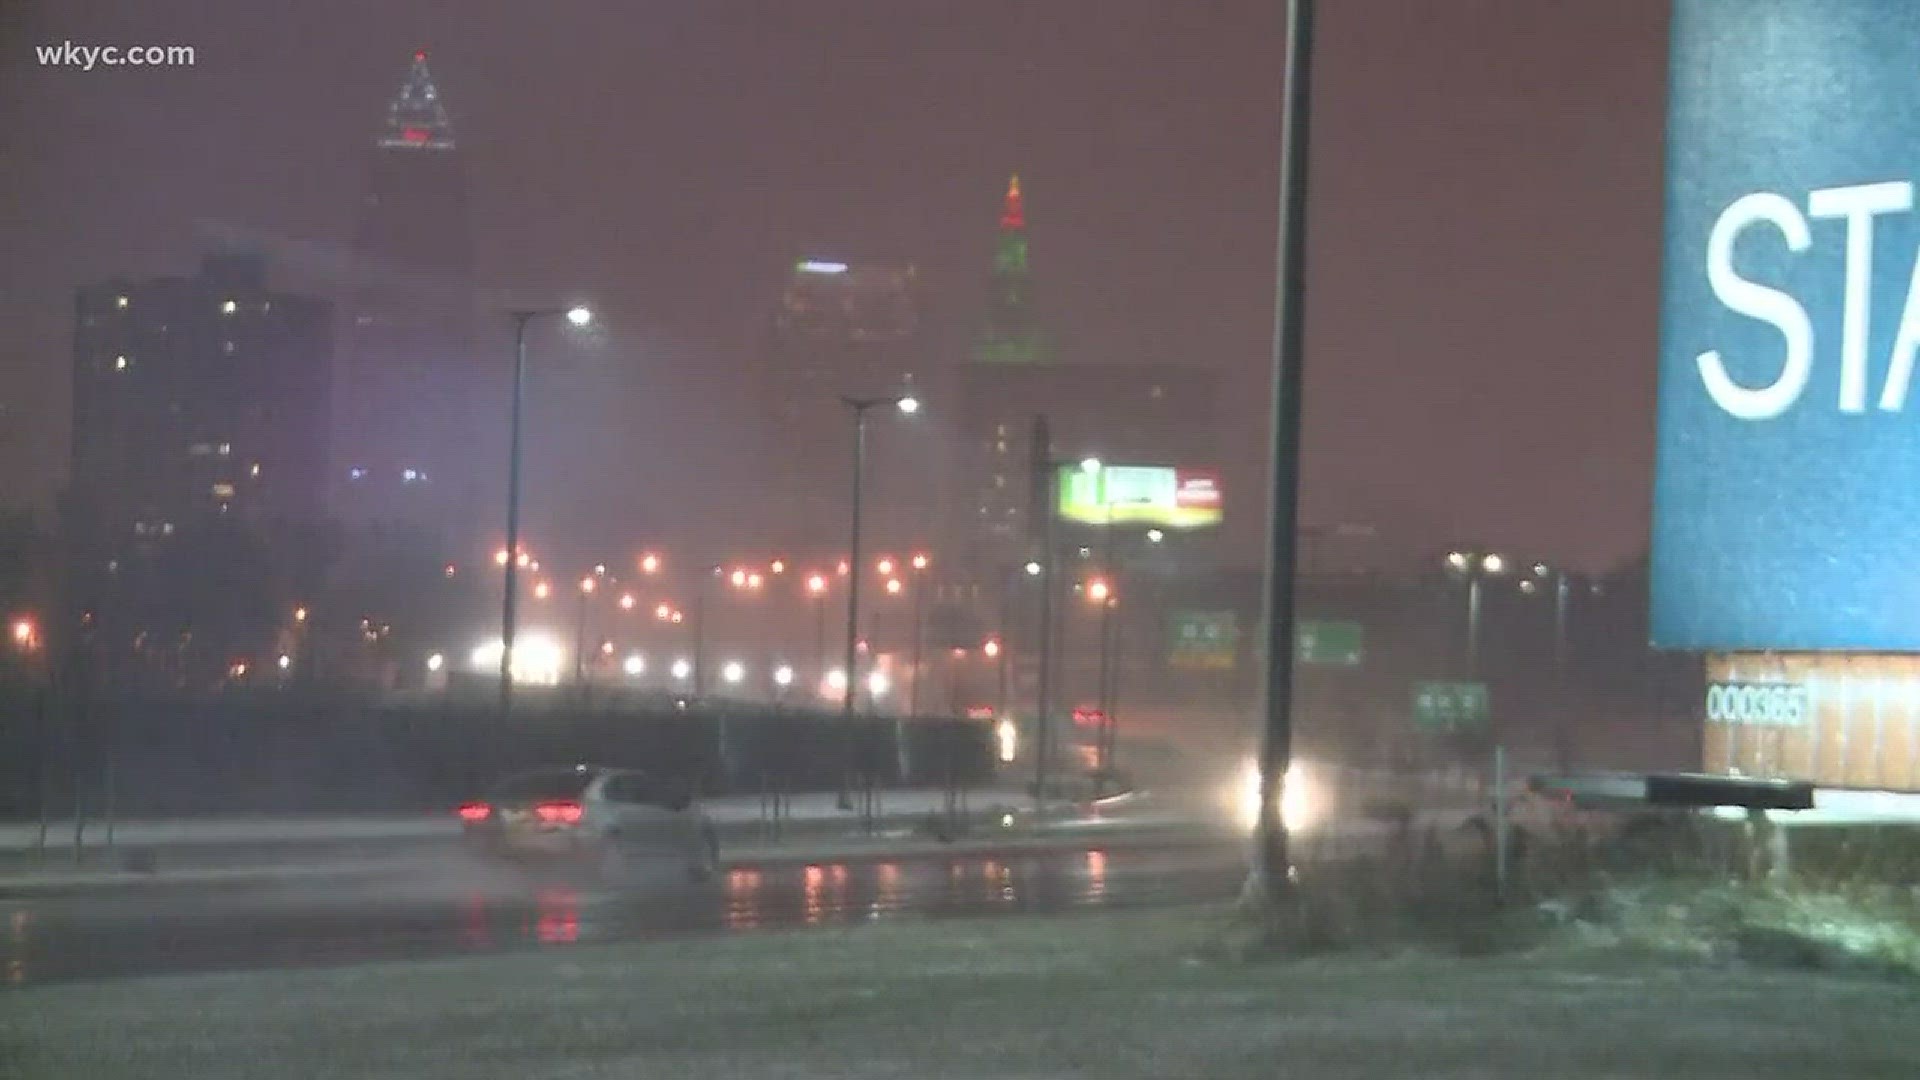 Wet roads greeted drivers along the Shoreway approaching downtown Cleveland. WKYC's Maureen Kyle has the details...